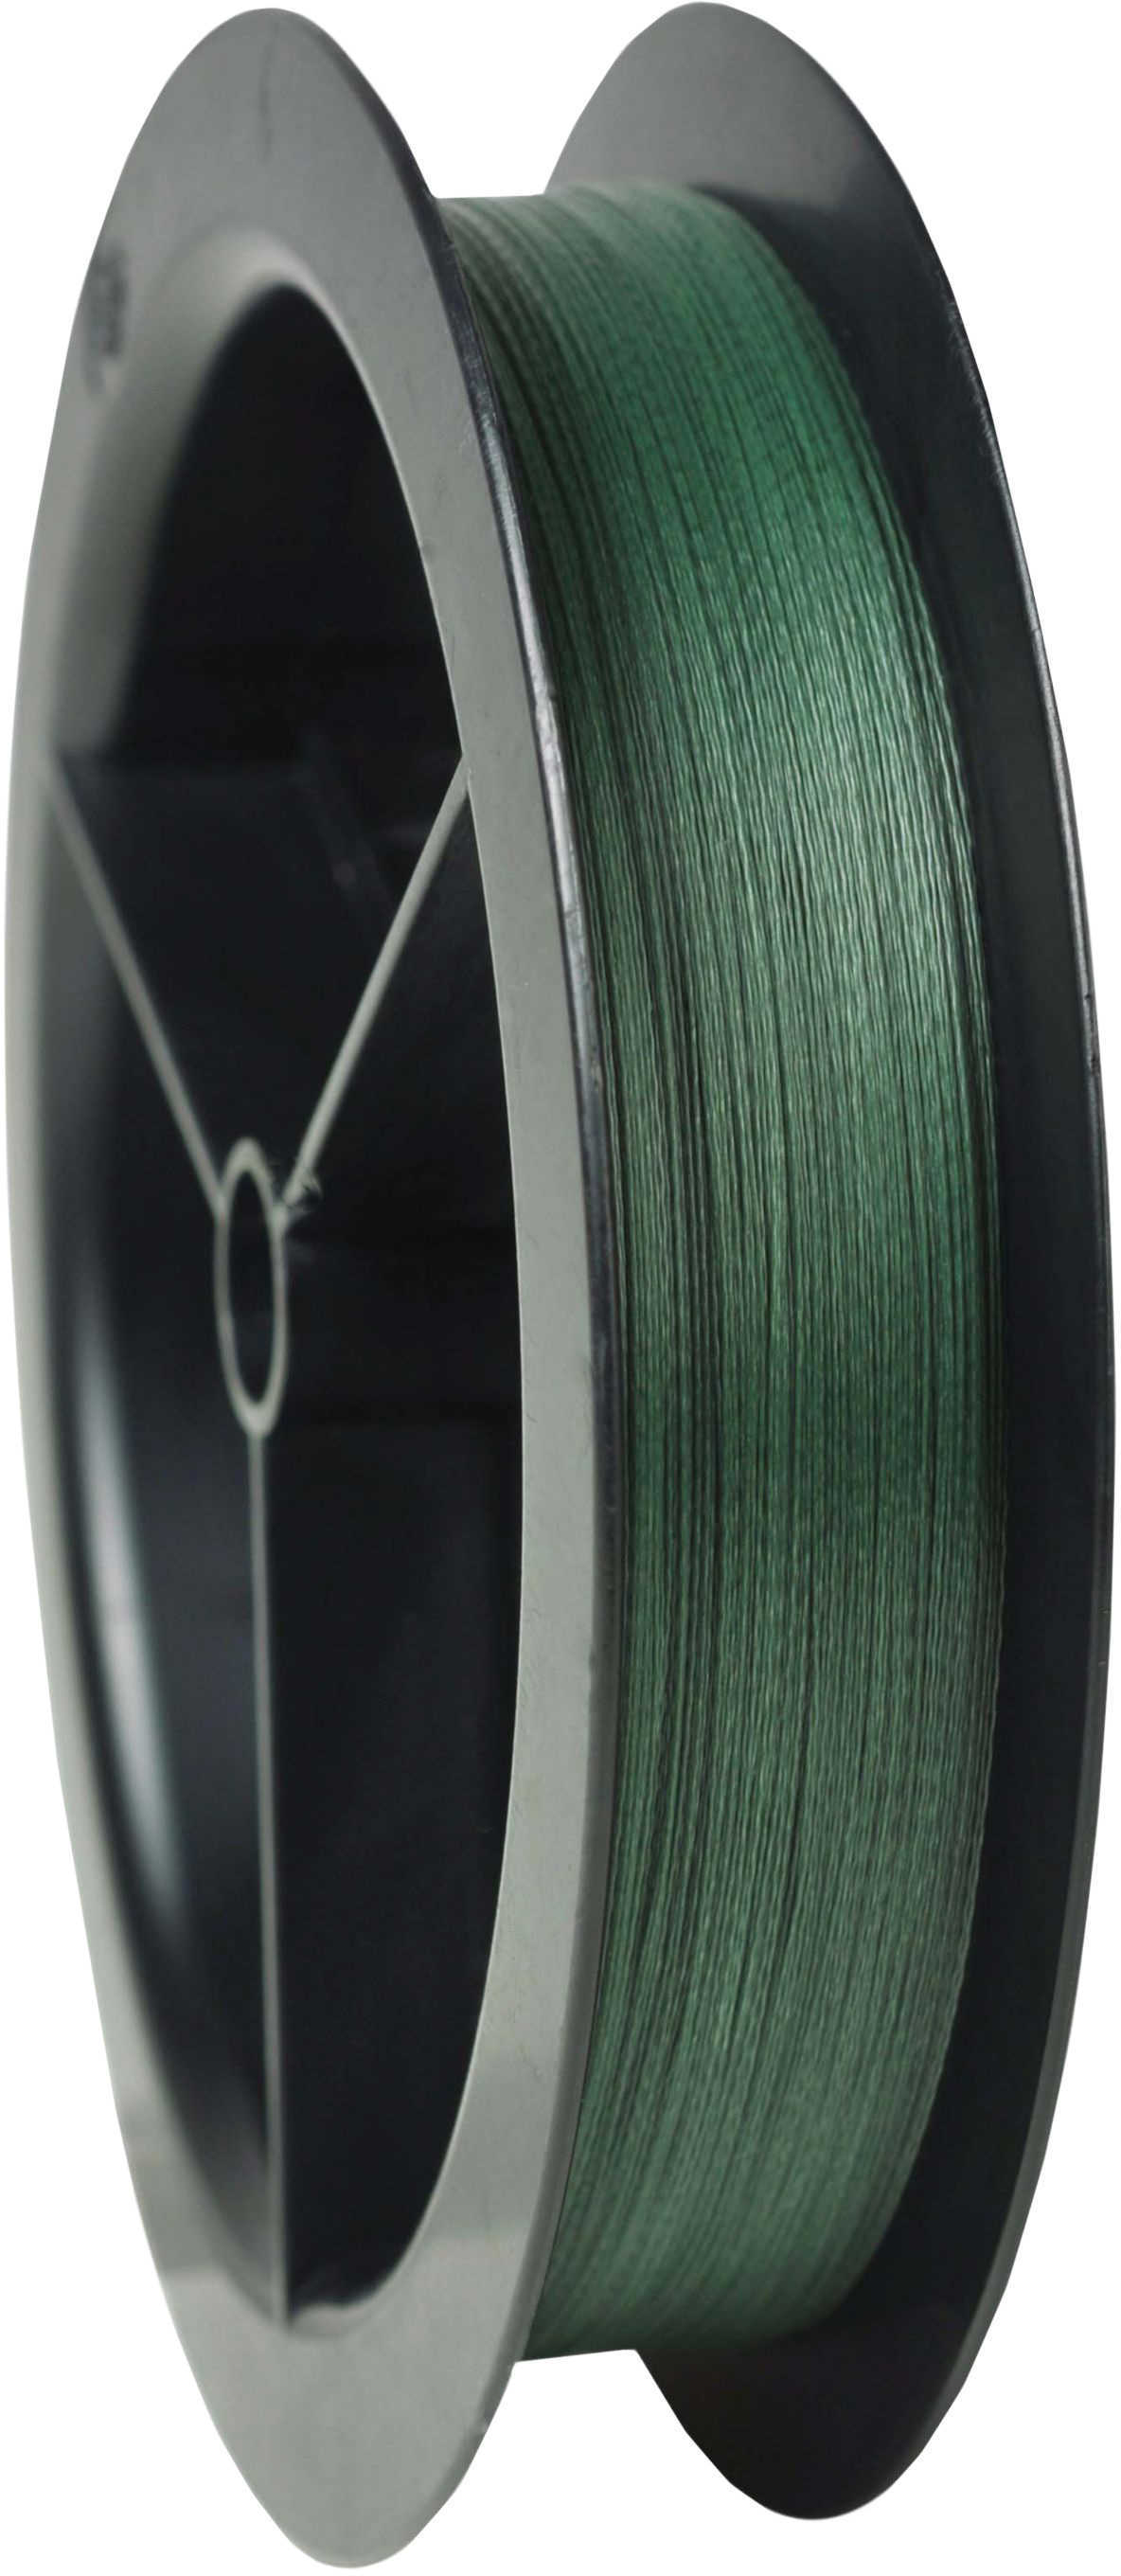 Spiderwire Stealth Braided Line, Moss Green 30 lb, 1500 Yards 1197360